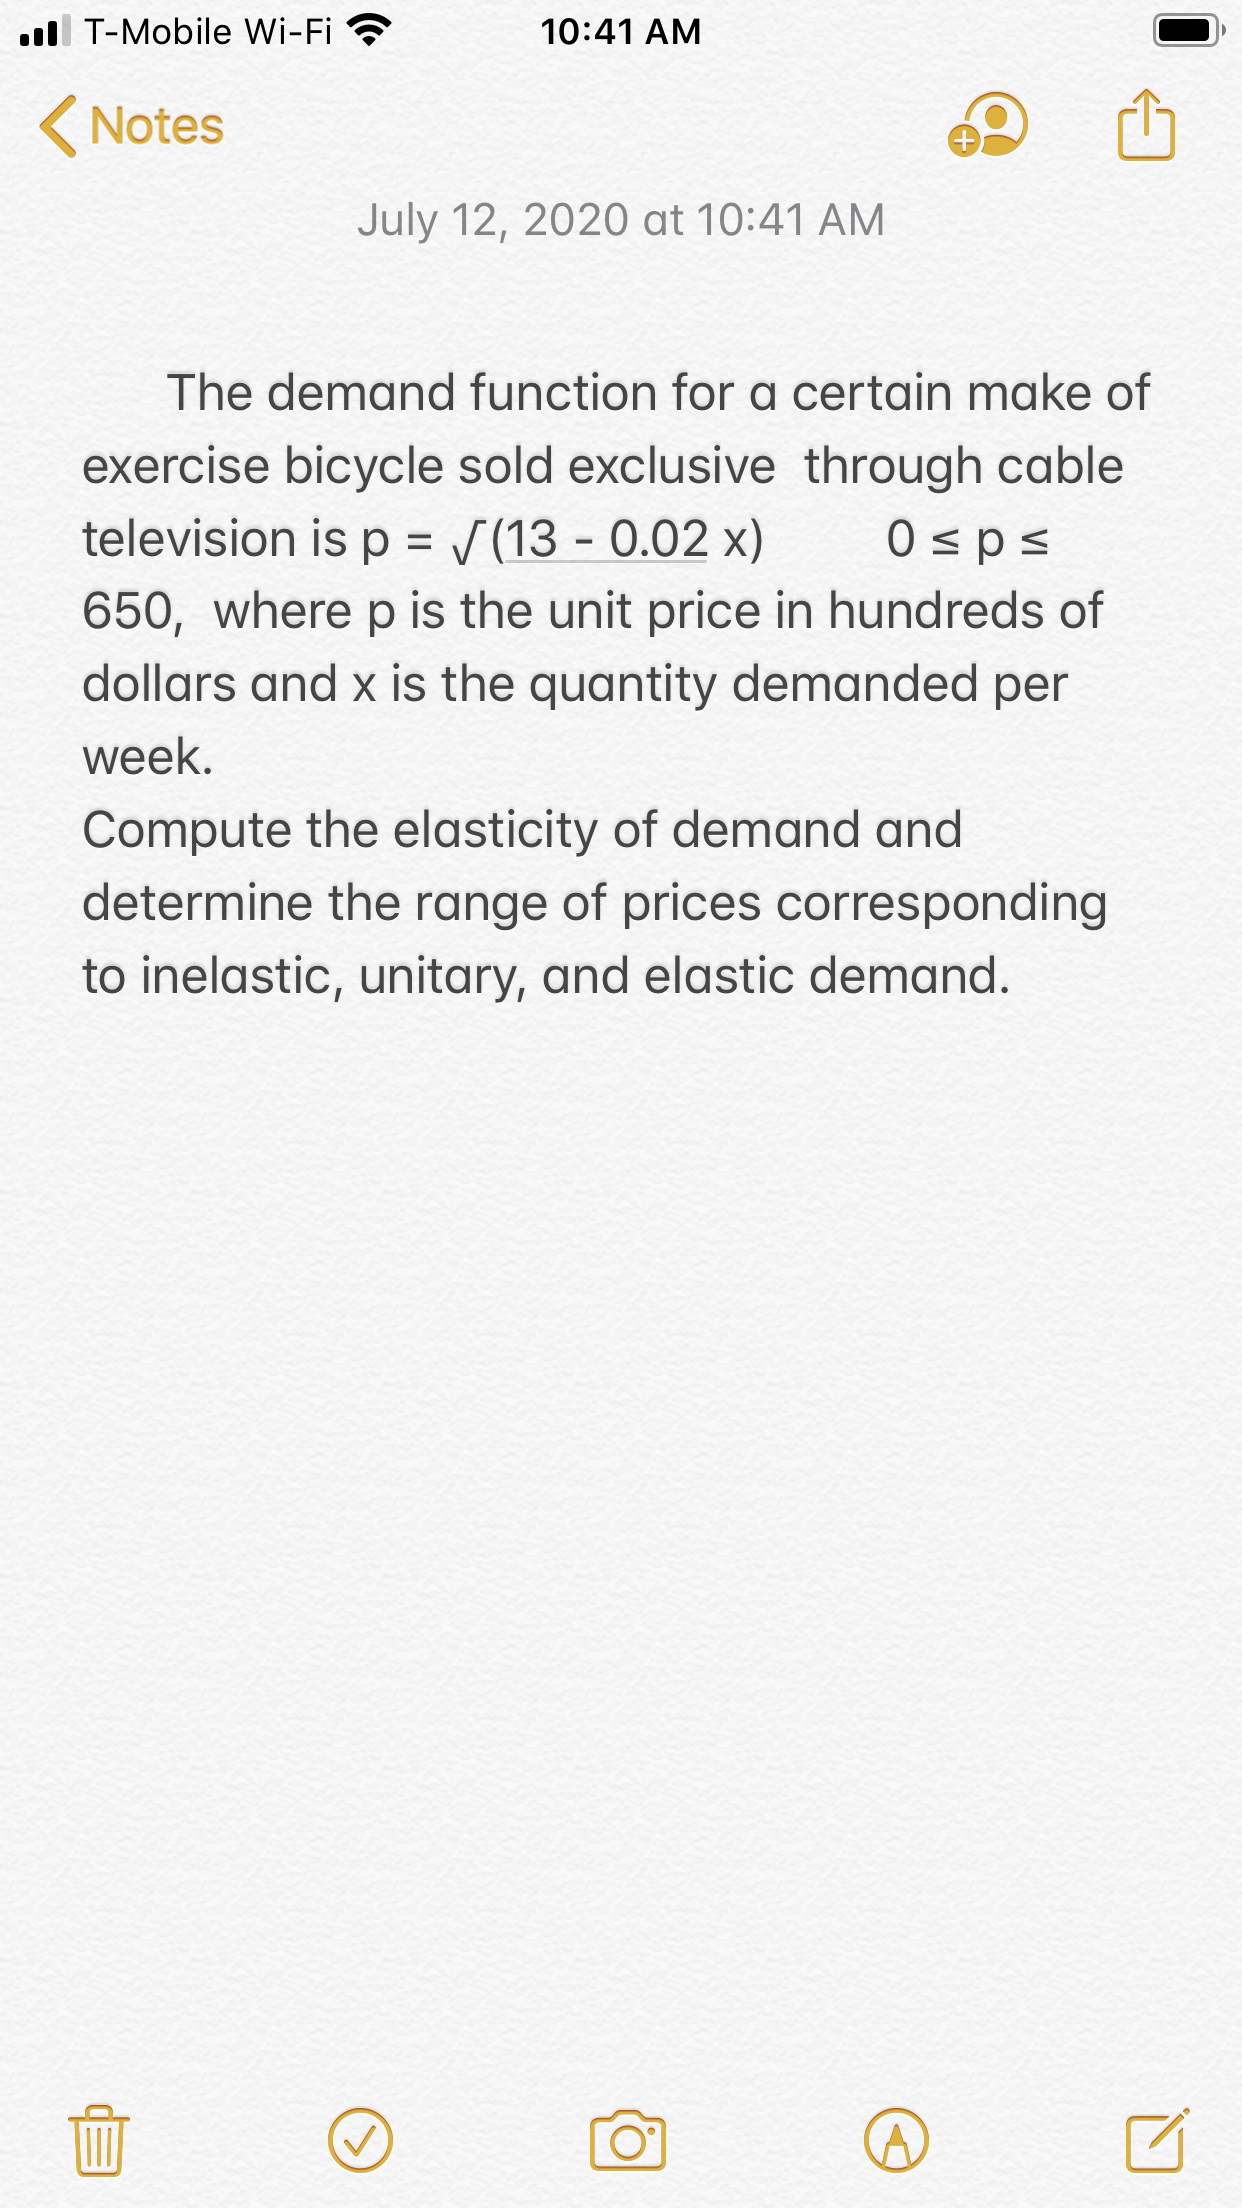 The demand function for a certain make of
exercise bicycle sold exclusive through cable
television is p = /(13 - 0.02 x)
0sps
650, where p is the unit price in hundreds of
dollars and x is the quantity demanded per
week
